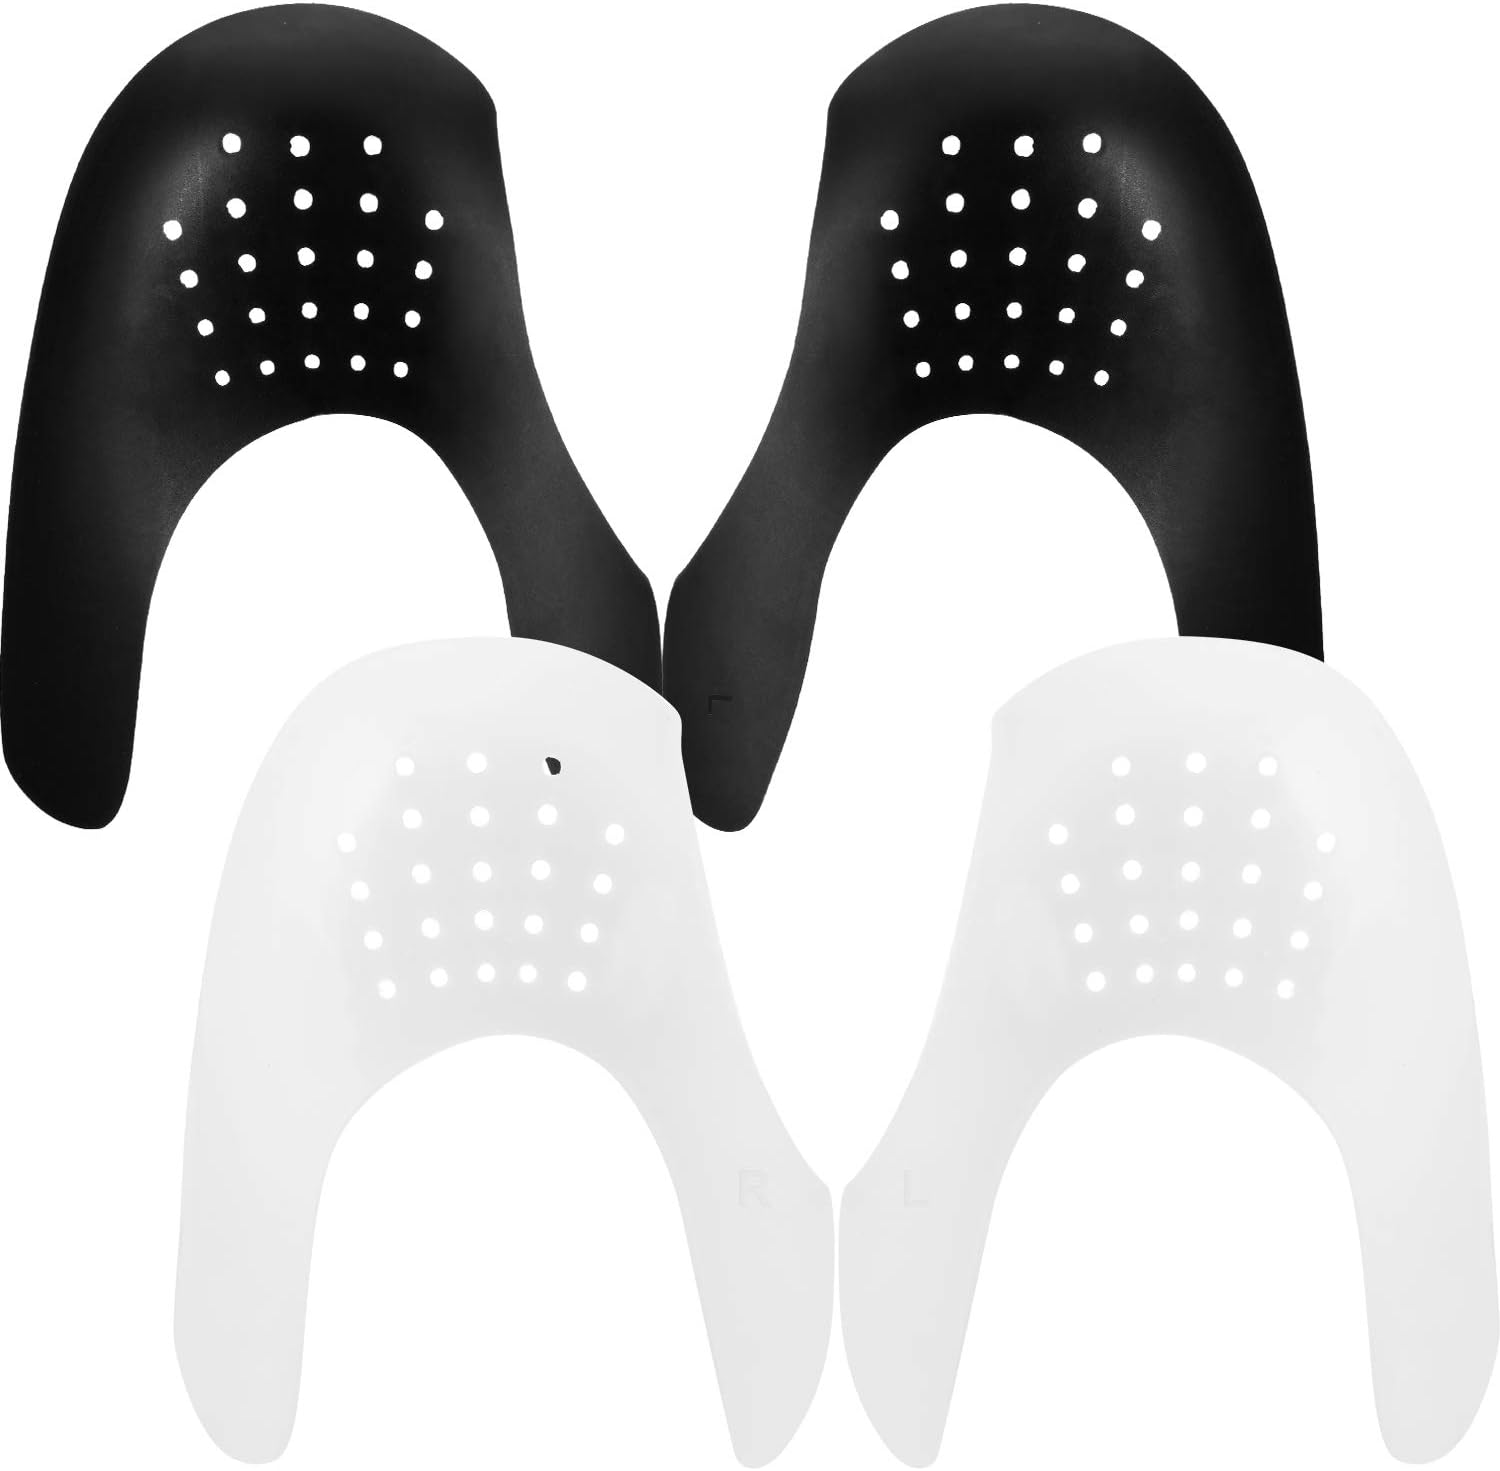 2 Pairs Anti-Wrinkle Shoes Crease Protector Toe Box [...]